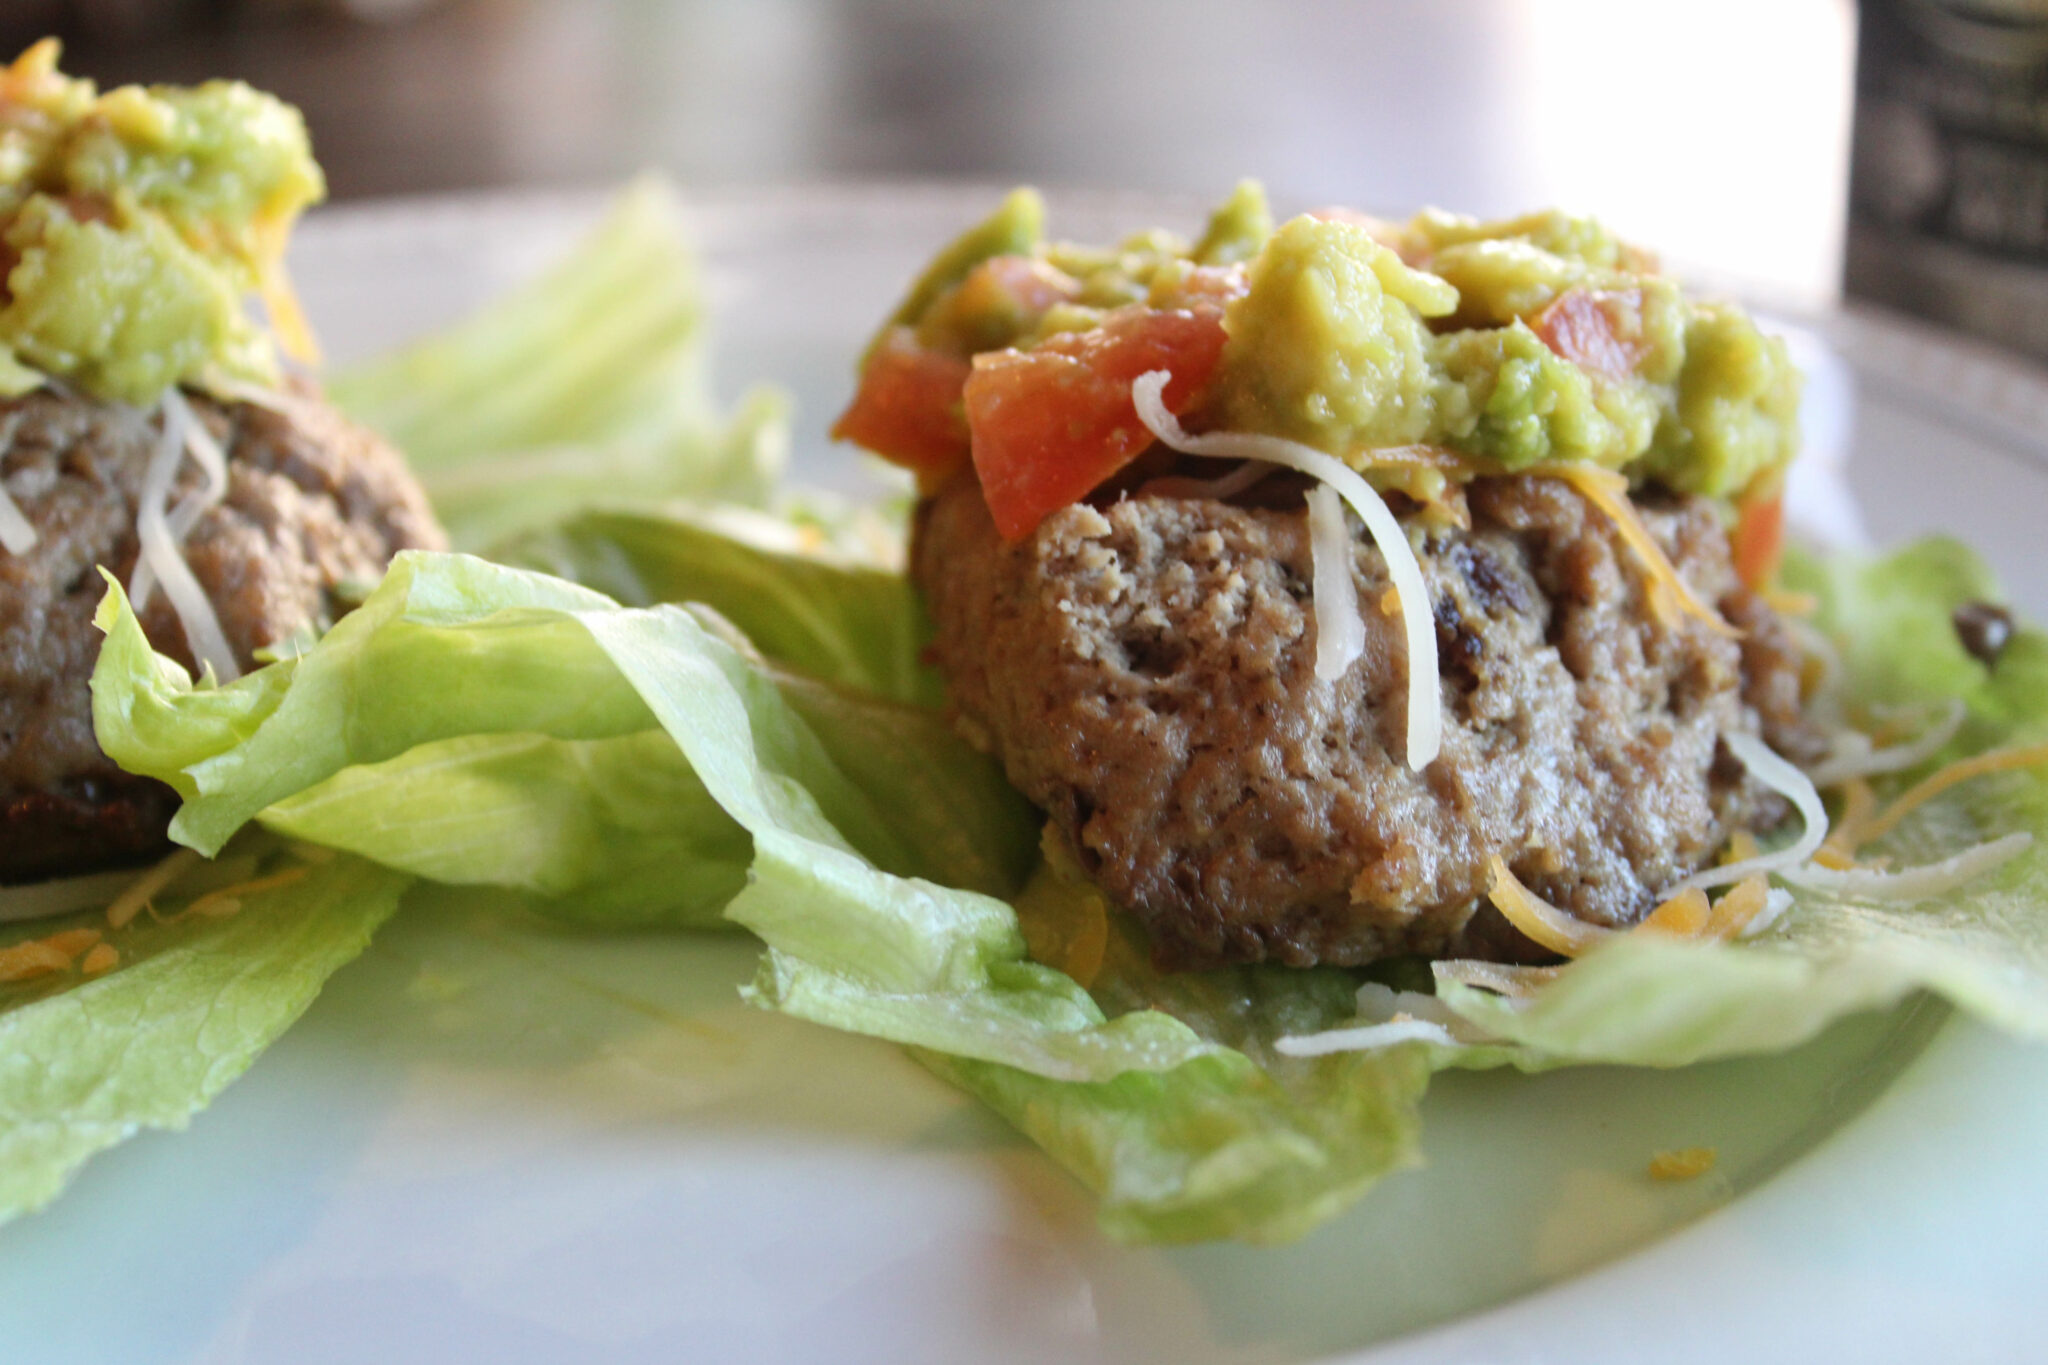 These Keto Low Carb Turkey Burgers are a great light lunch or dinner. They're so flavorful and juicy and they have a delicious avocado topping.